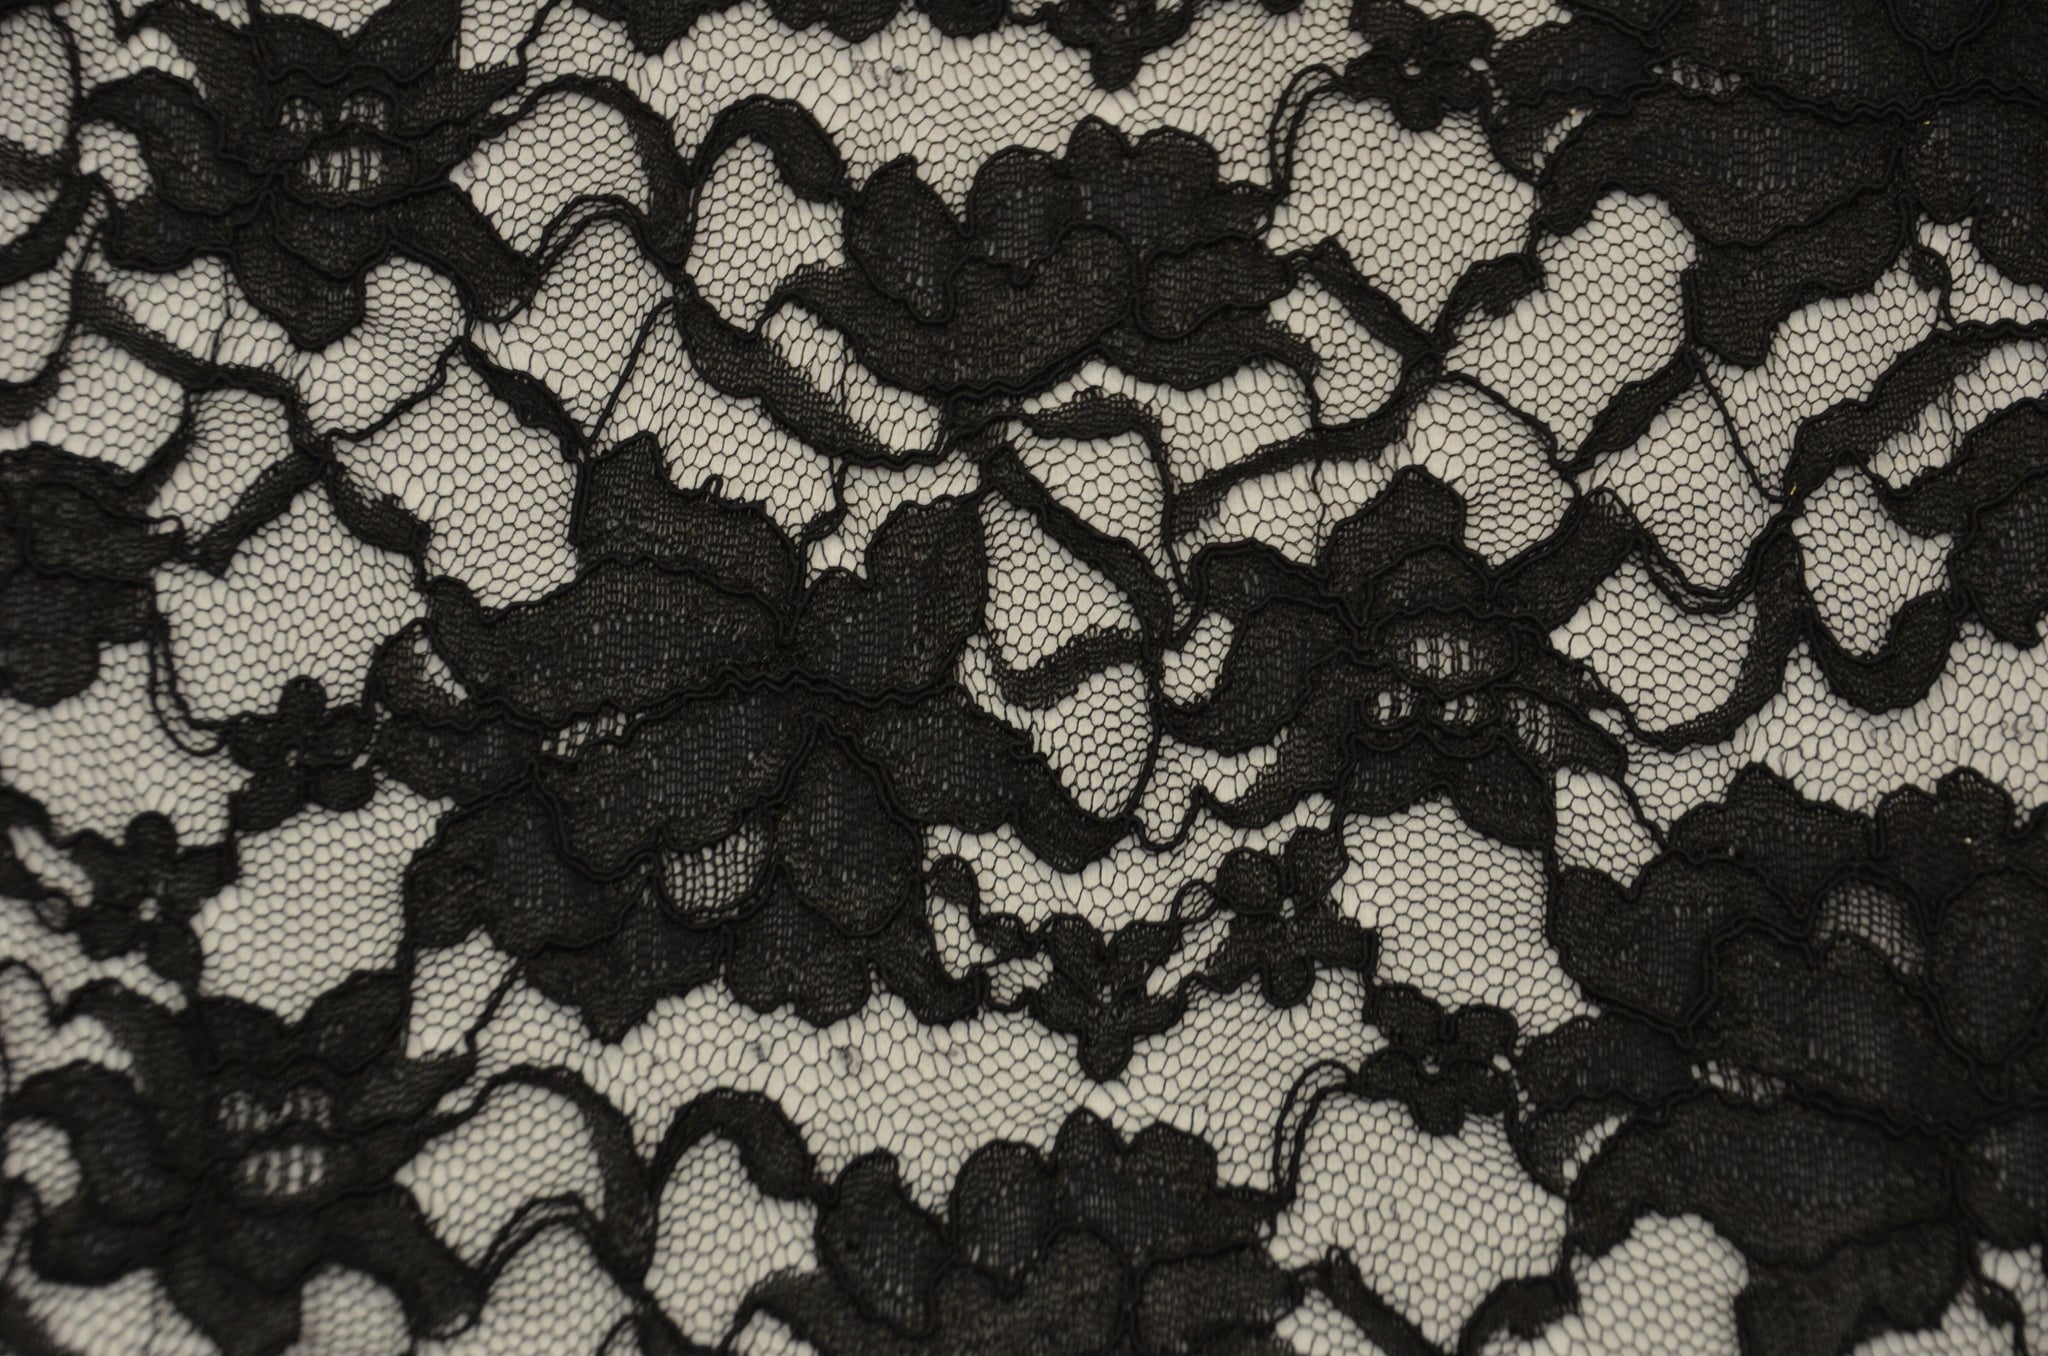 Black Lace Fabric, Double Sided Scalloped Lace in Black